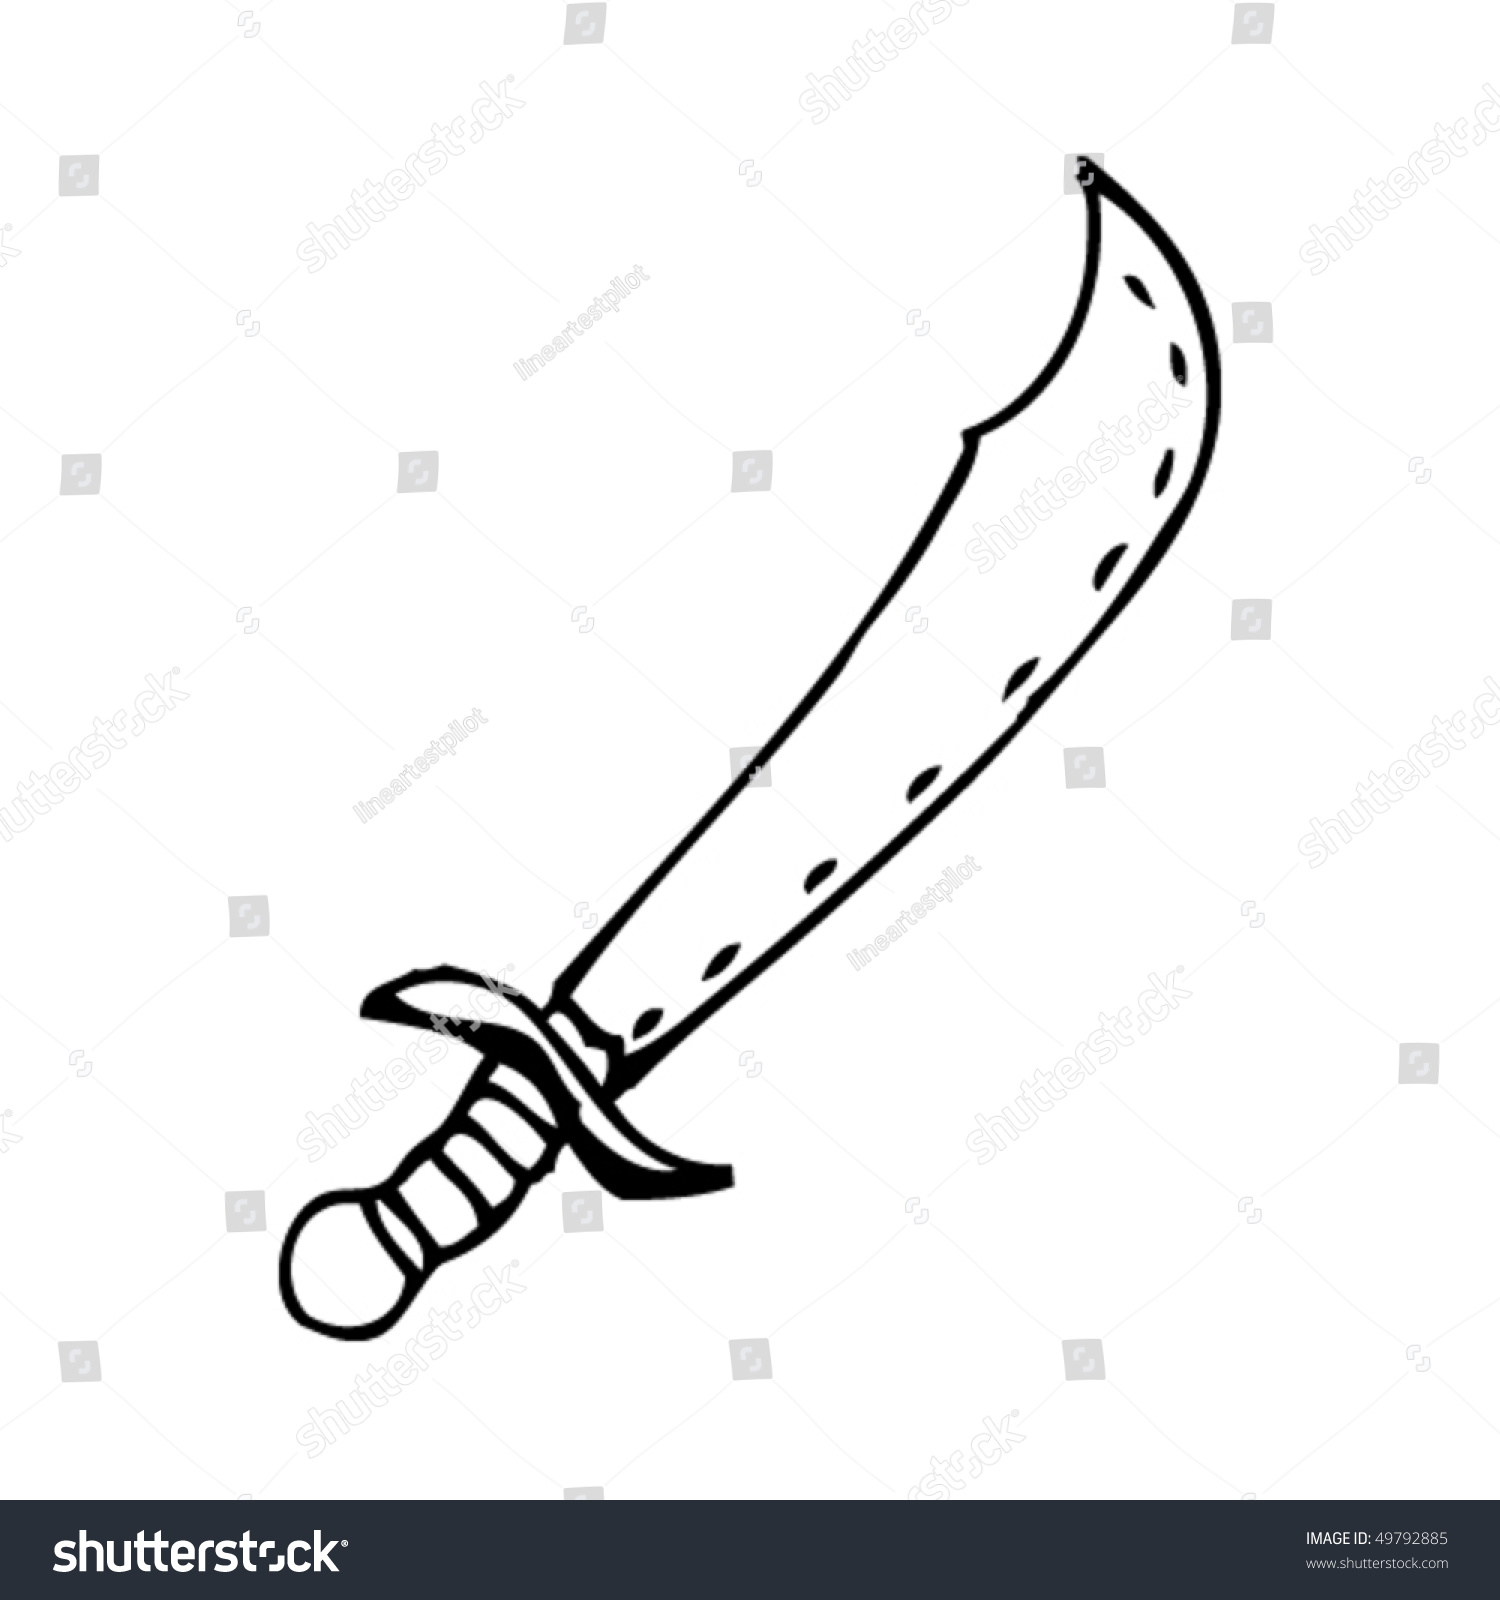 Quirky Drawing Of A Sword Stock Vector Illustration 49792885 : Shutterstock